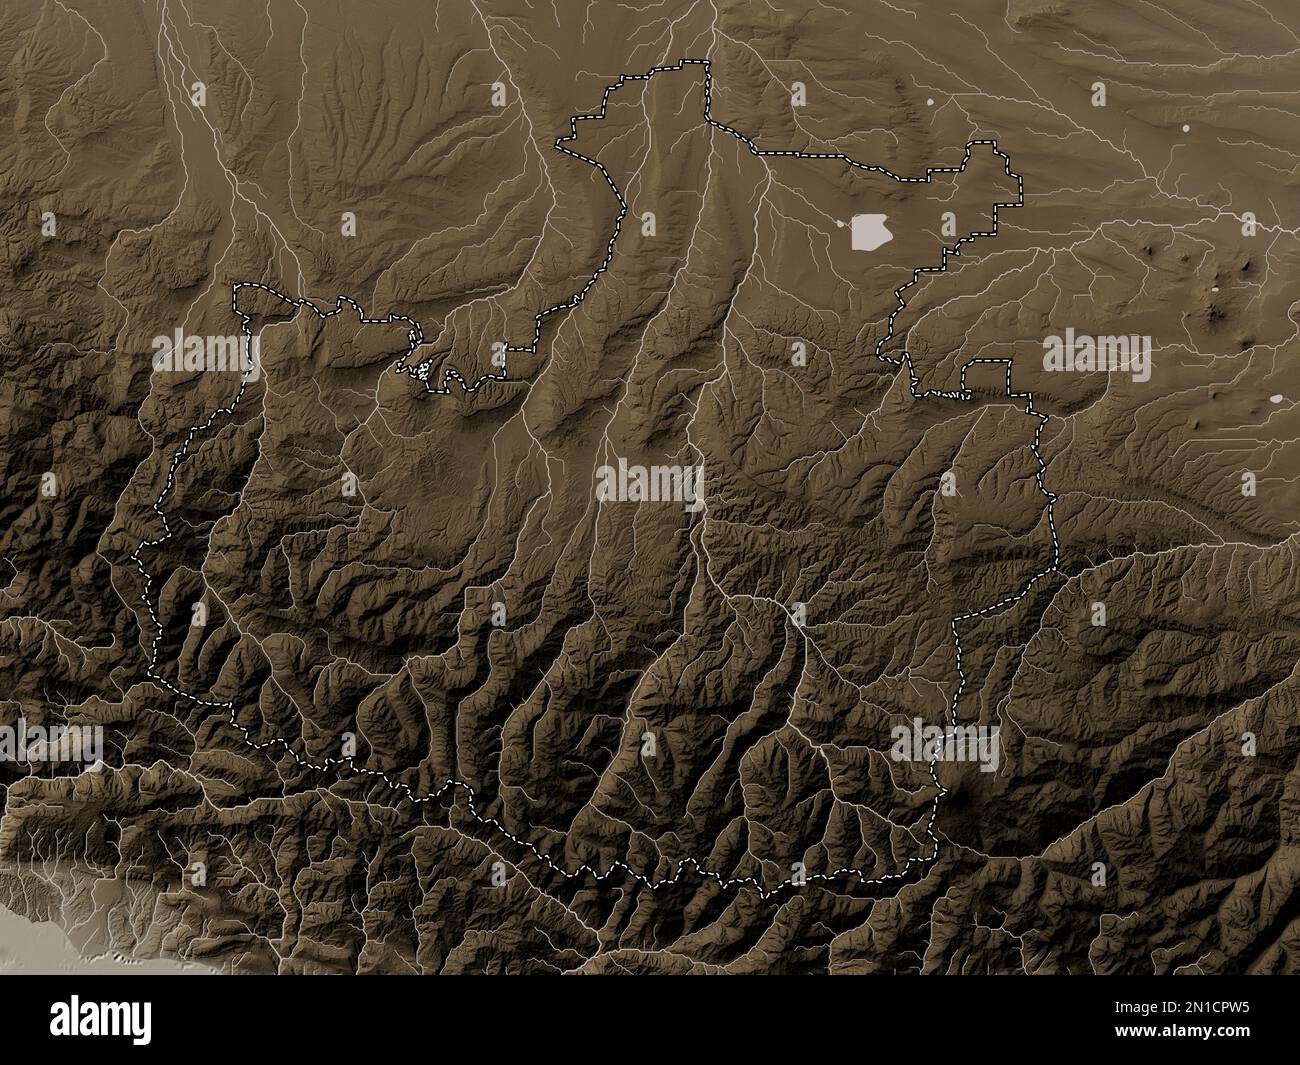 Karachay-Cherkess, republic of Russia. Elevation map colored in sepia tones with lakes and rivers Stock Photo